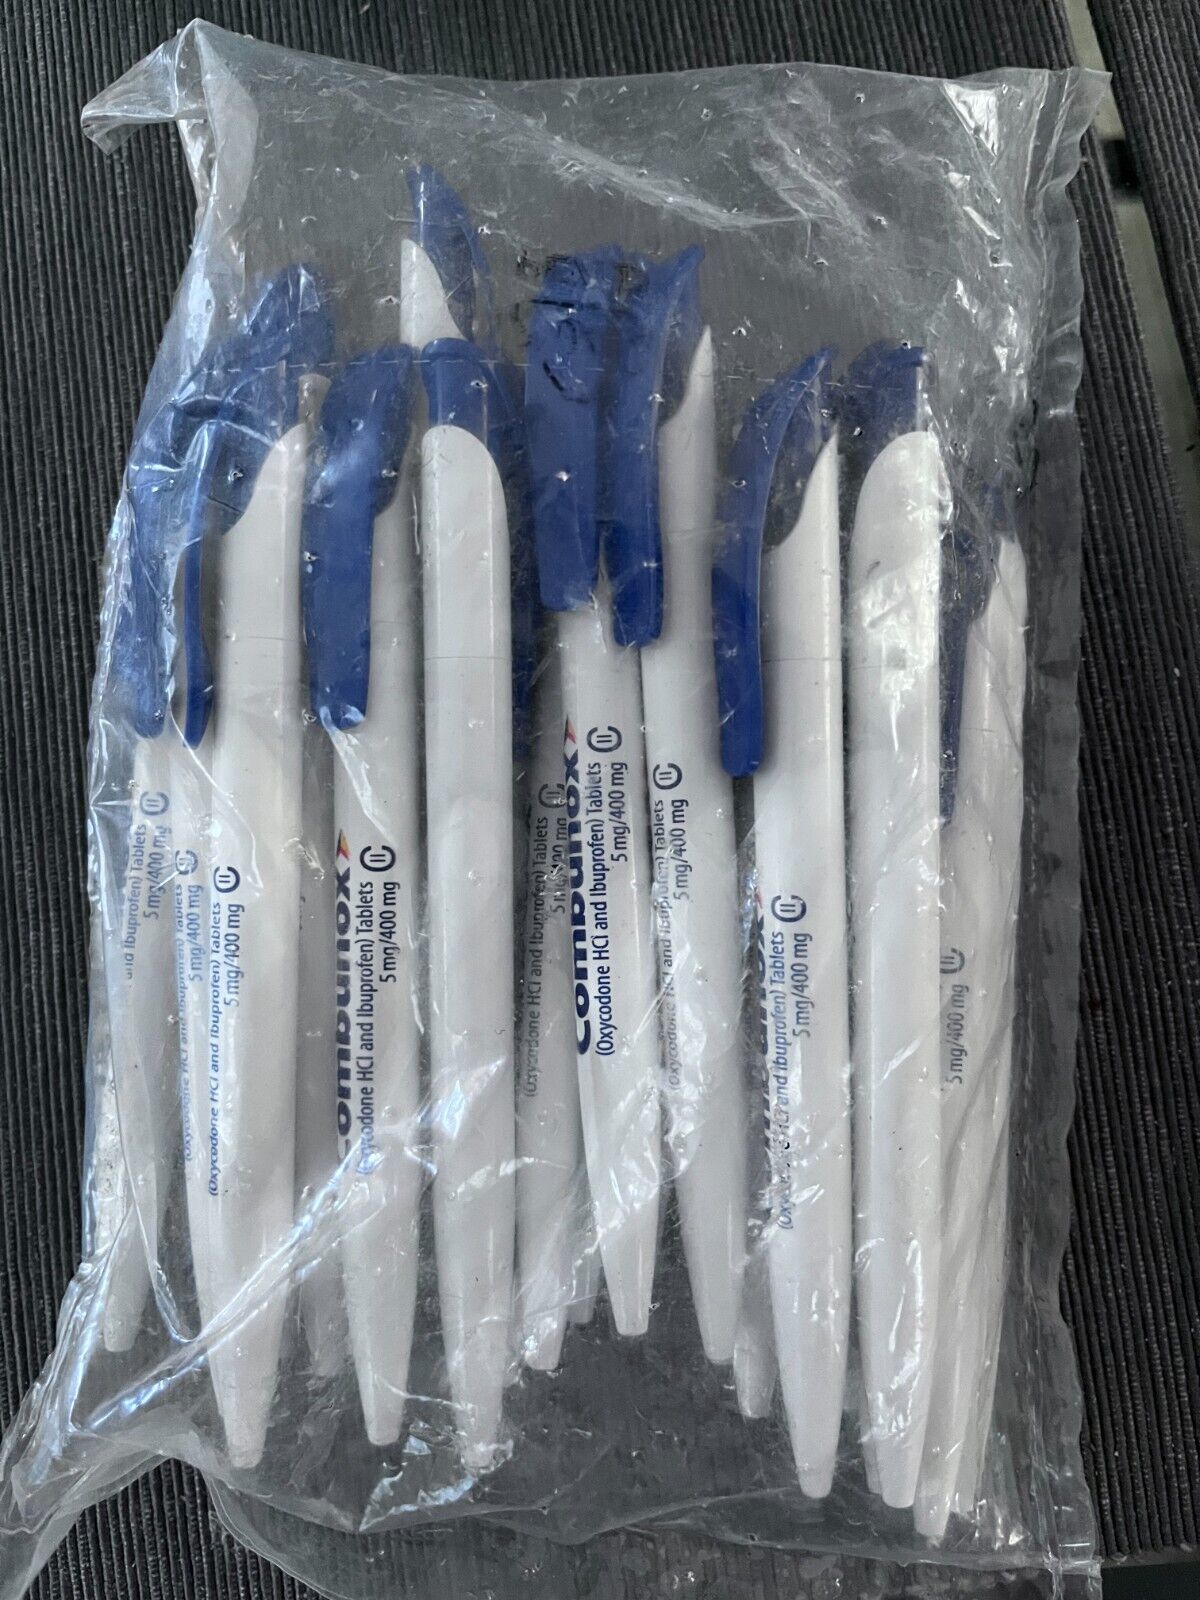 Lot of 25 COMBUNOX (OXYCODONE) Pharmaceutical Rep blue/white PENS New in bag